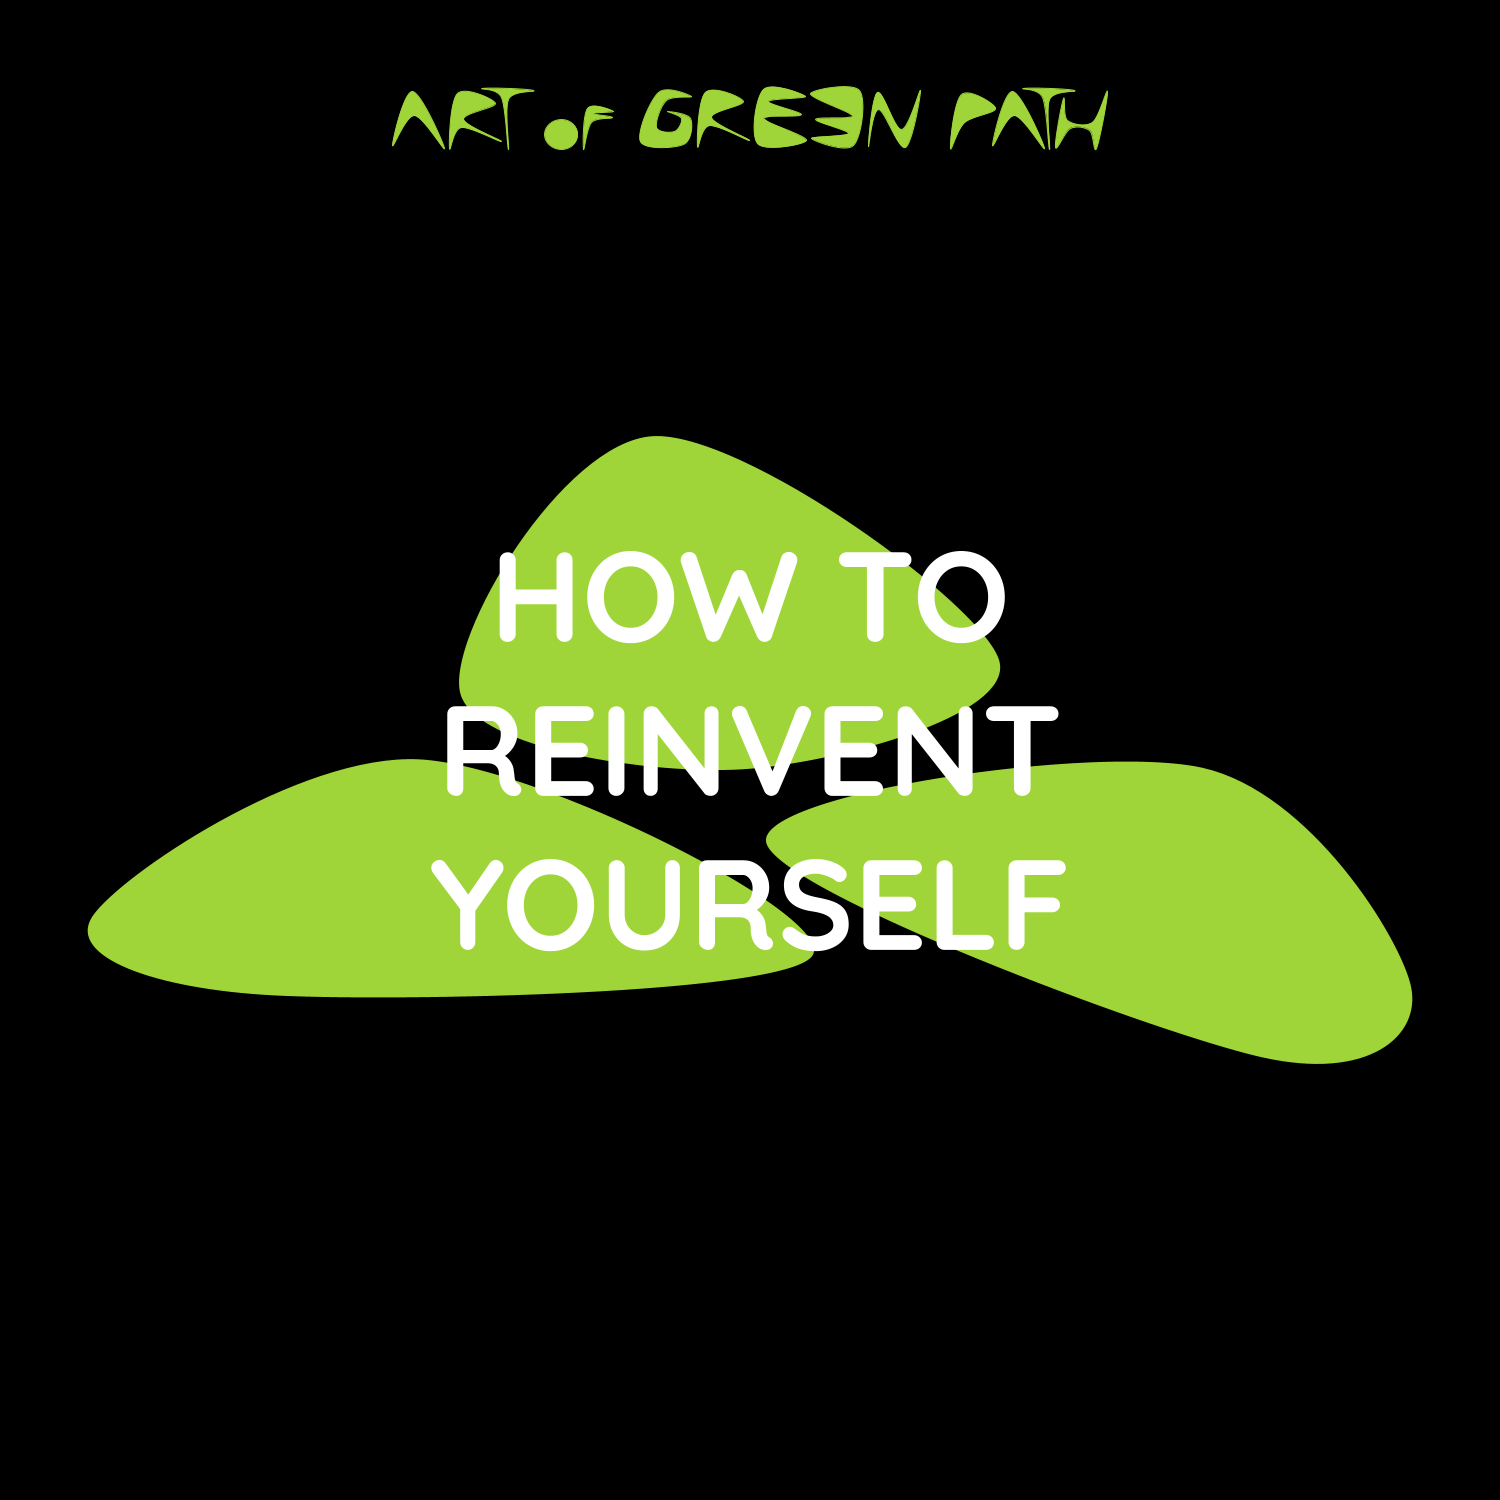 How To Reinvent Yourself - Your Life Change Guide - Art Of Green Path